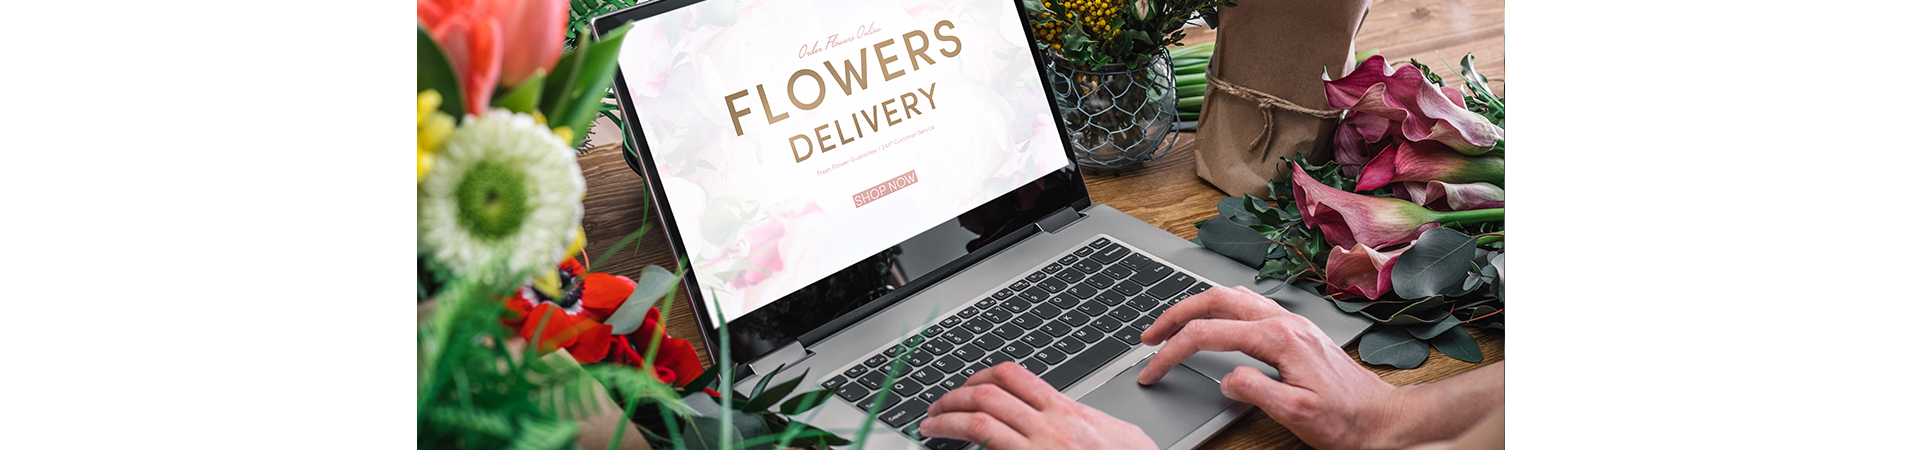 A close-up shot of a person working at a laptop with an open browser that says “Flower delivery.”